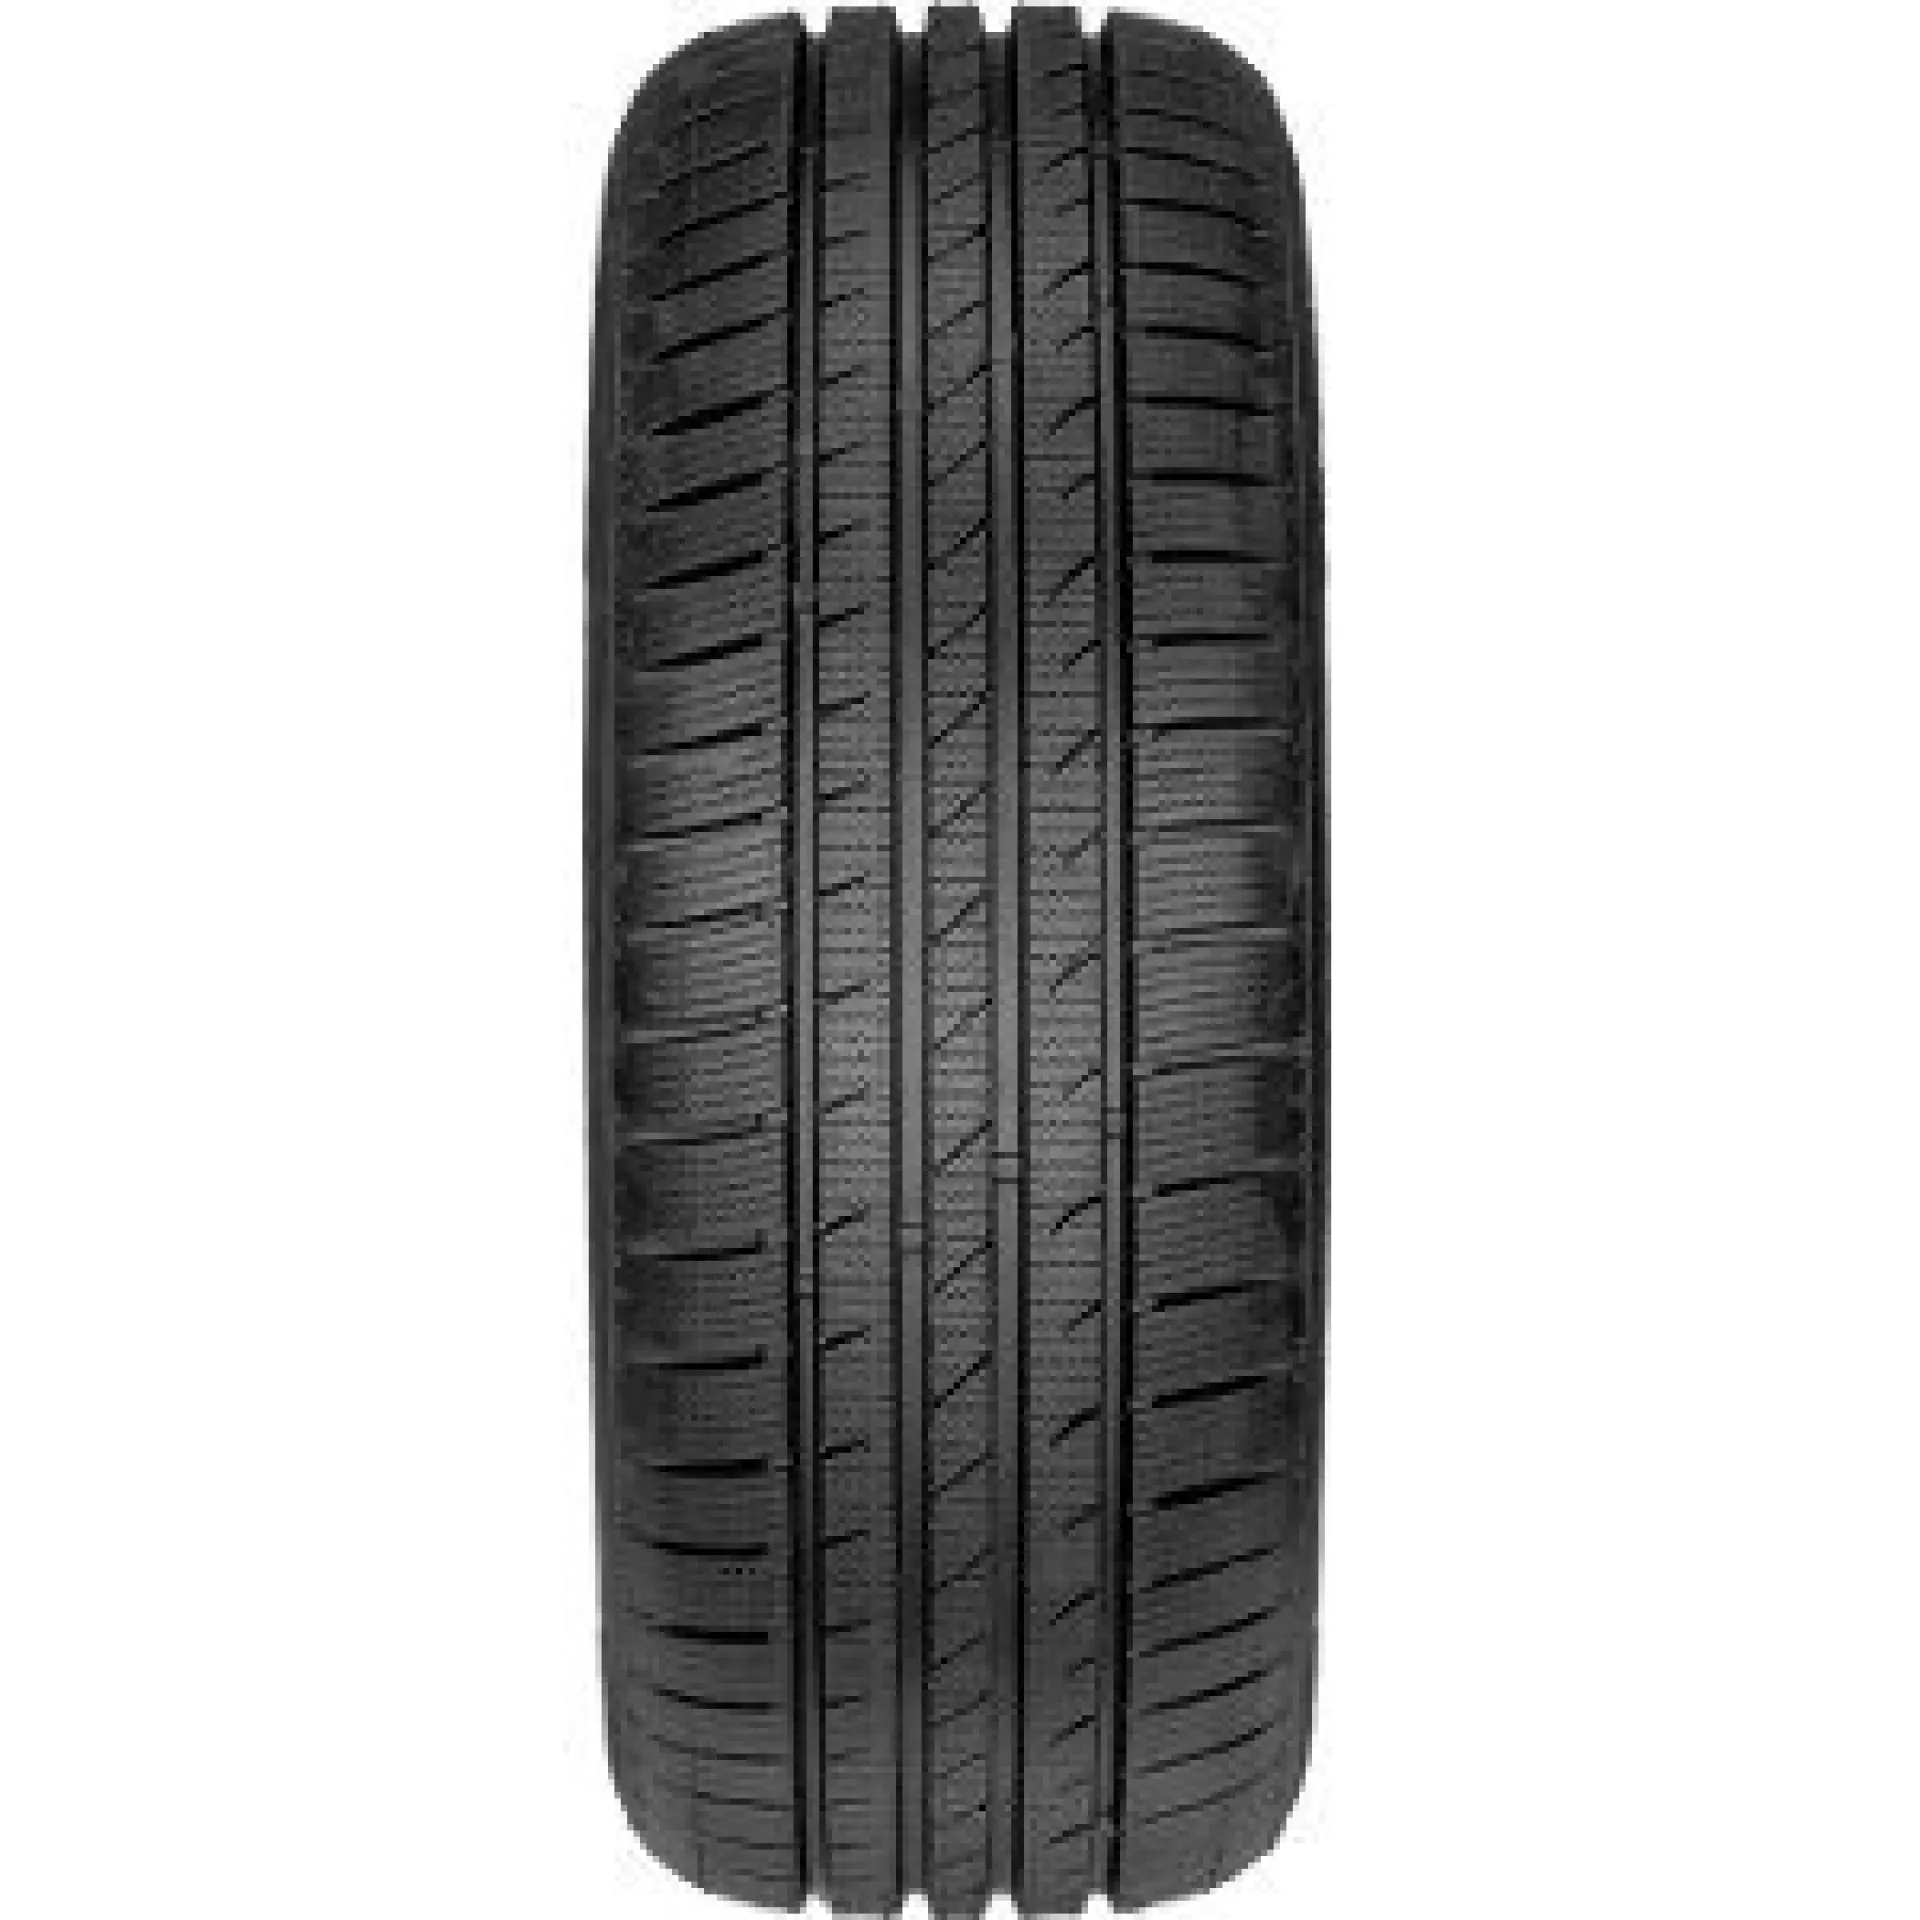 Fortuna Gowin UHP 235/45R17 97V XL